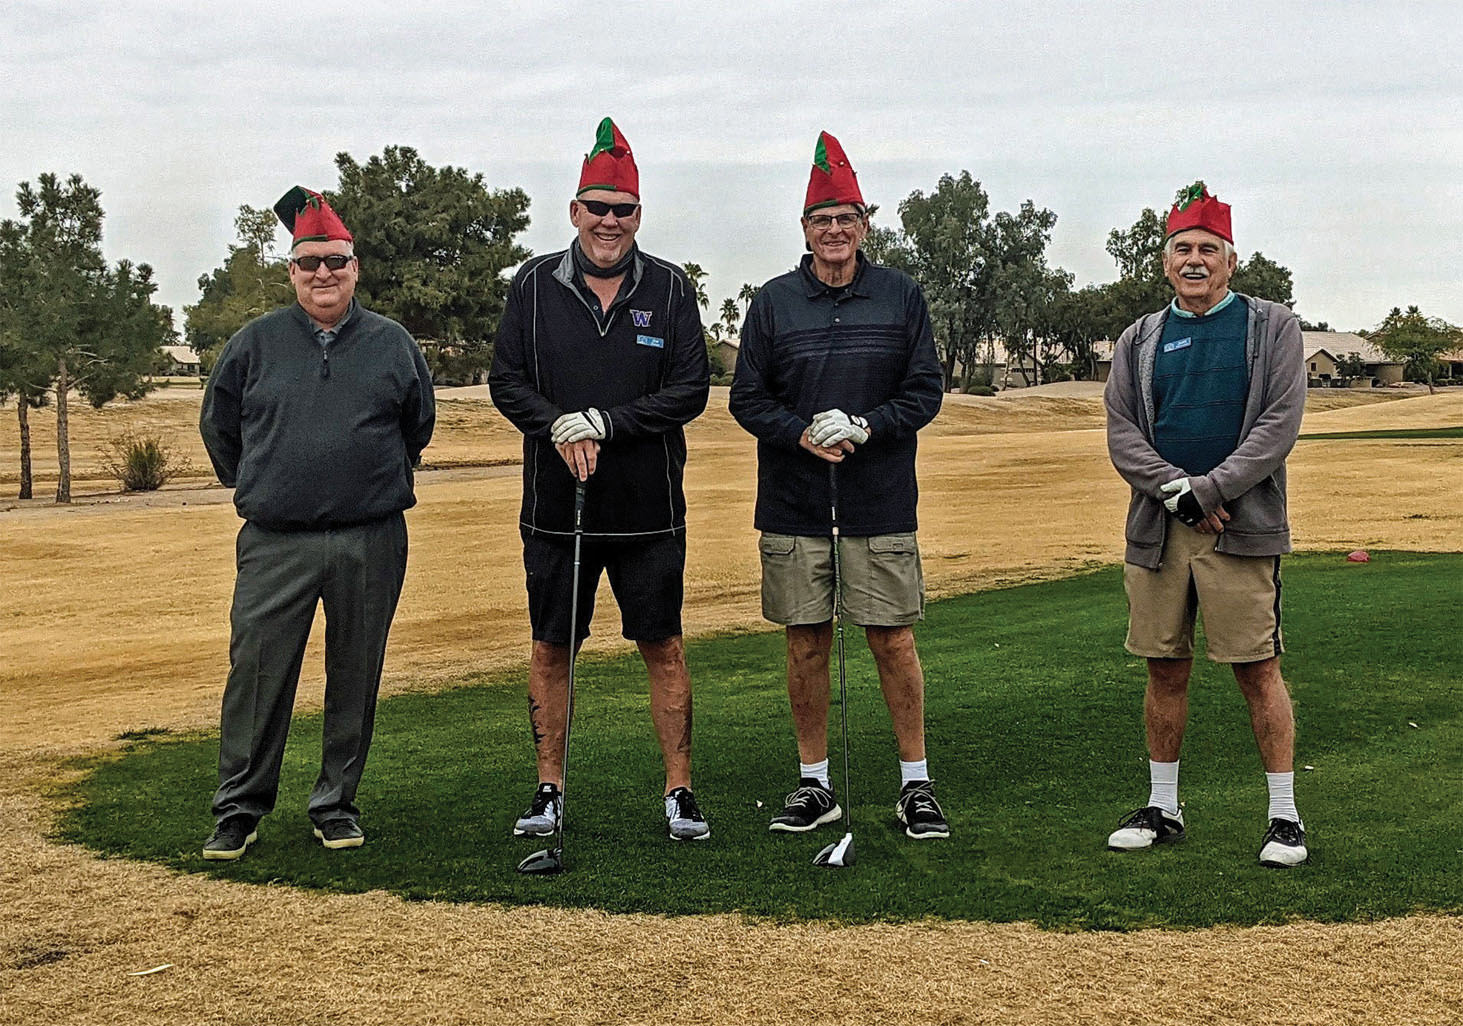 PCM9GA elves leave Santa’s workshop for a quick nine on Christmas Eve (left to right): Mike Brown, “Jingles;” Joe Oliver, “Snowflake;” Fred Schmidt, “Gildor;” and Josh Rabinowitz, “Poldo.”